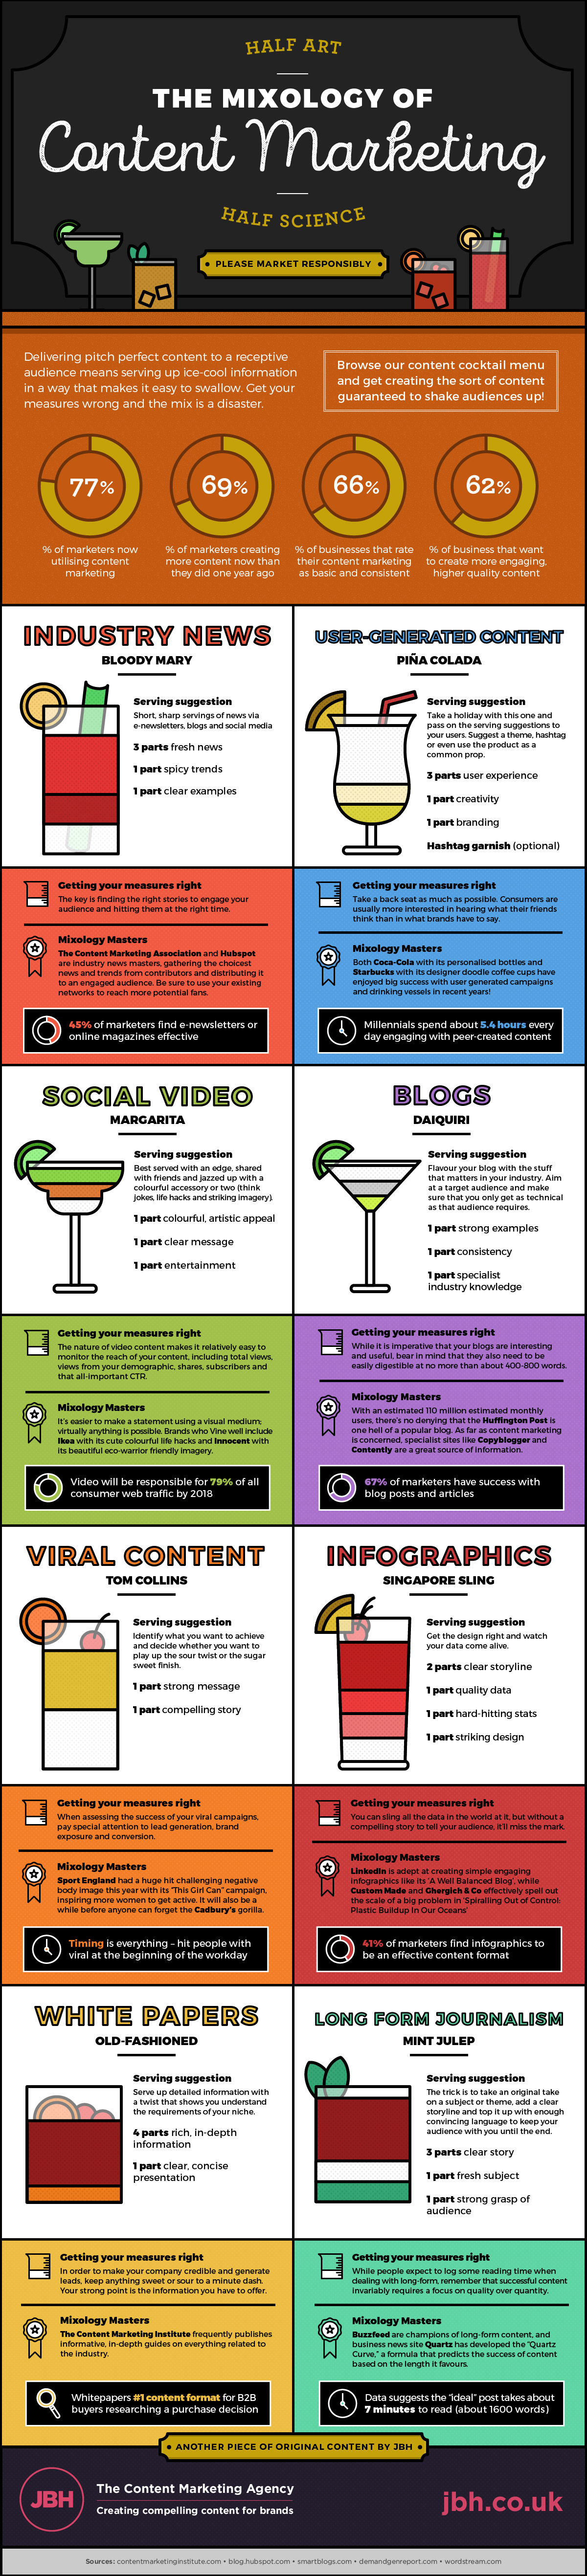 The Mixology of Content Marketing